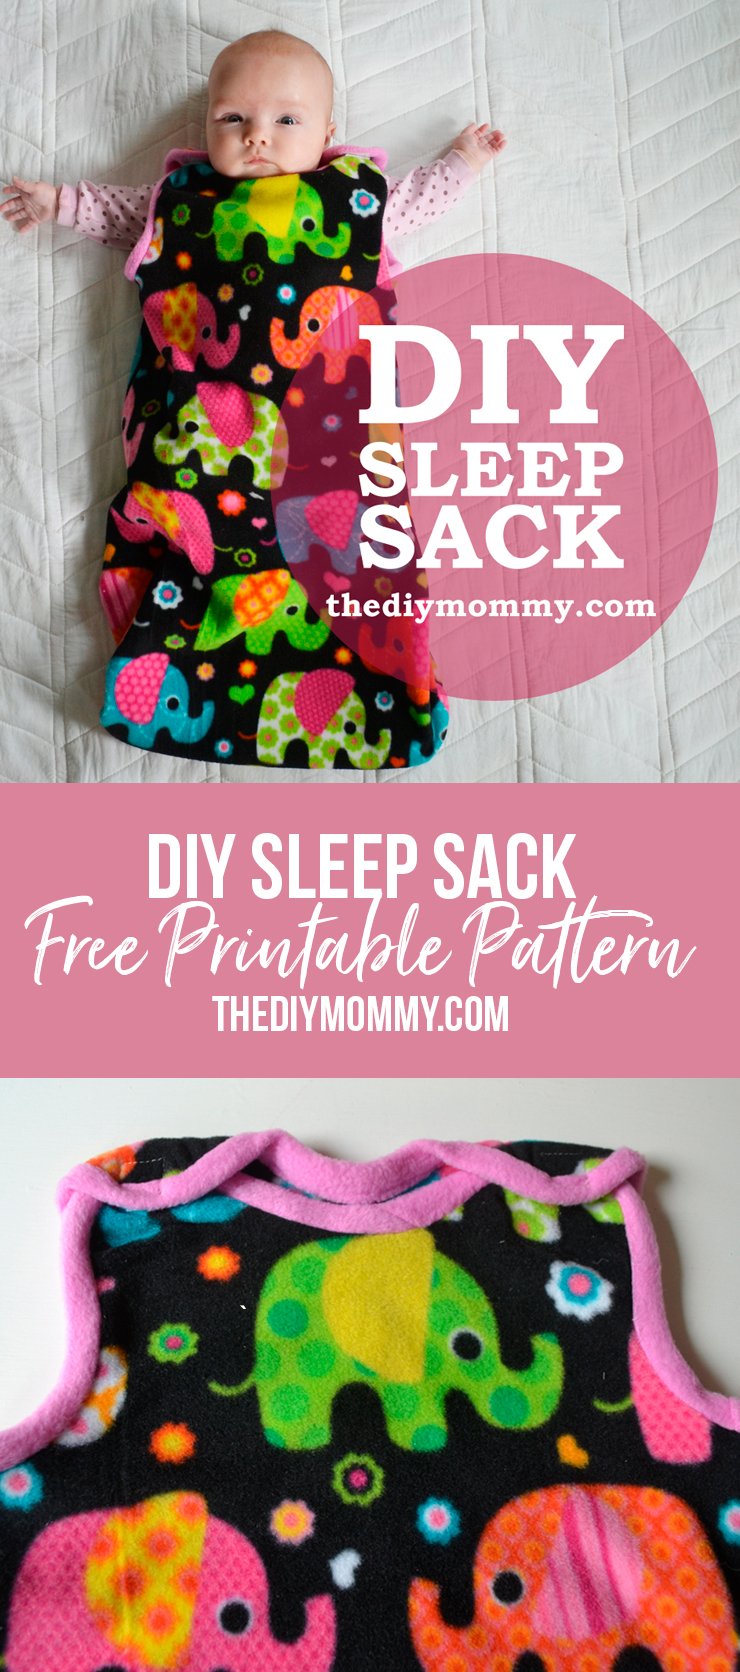 Simple and cute baby sleep sack tutorial with a free pattern and printable instructions